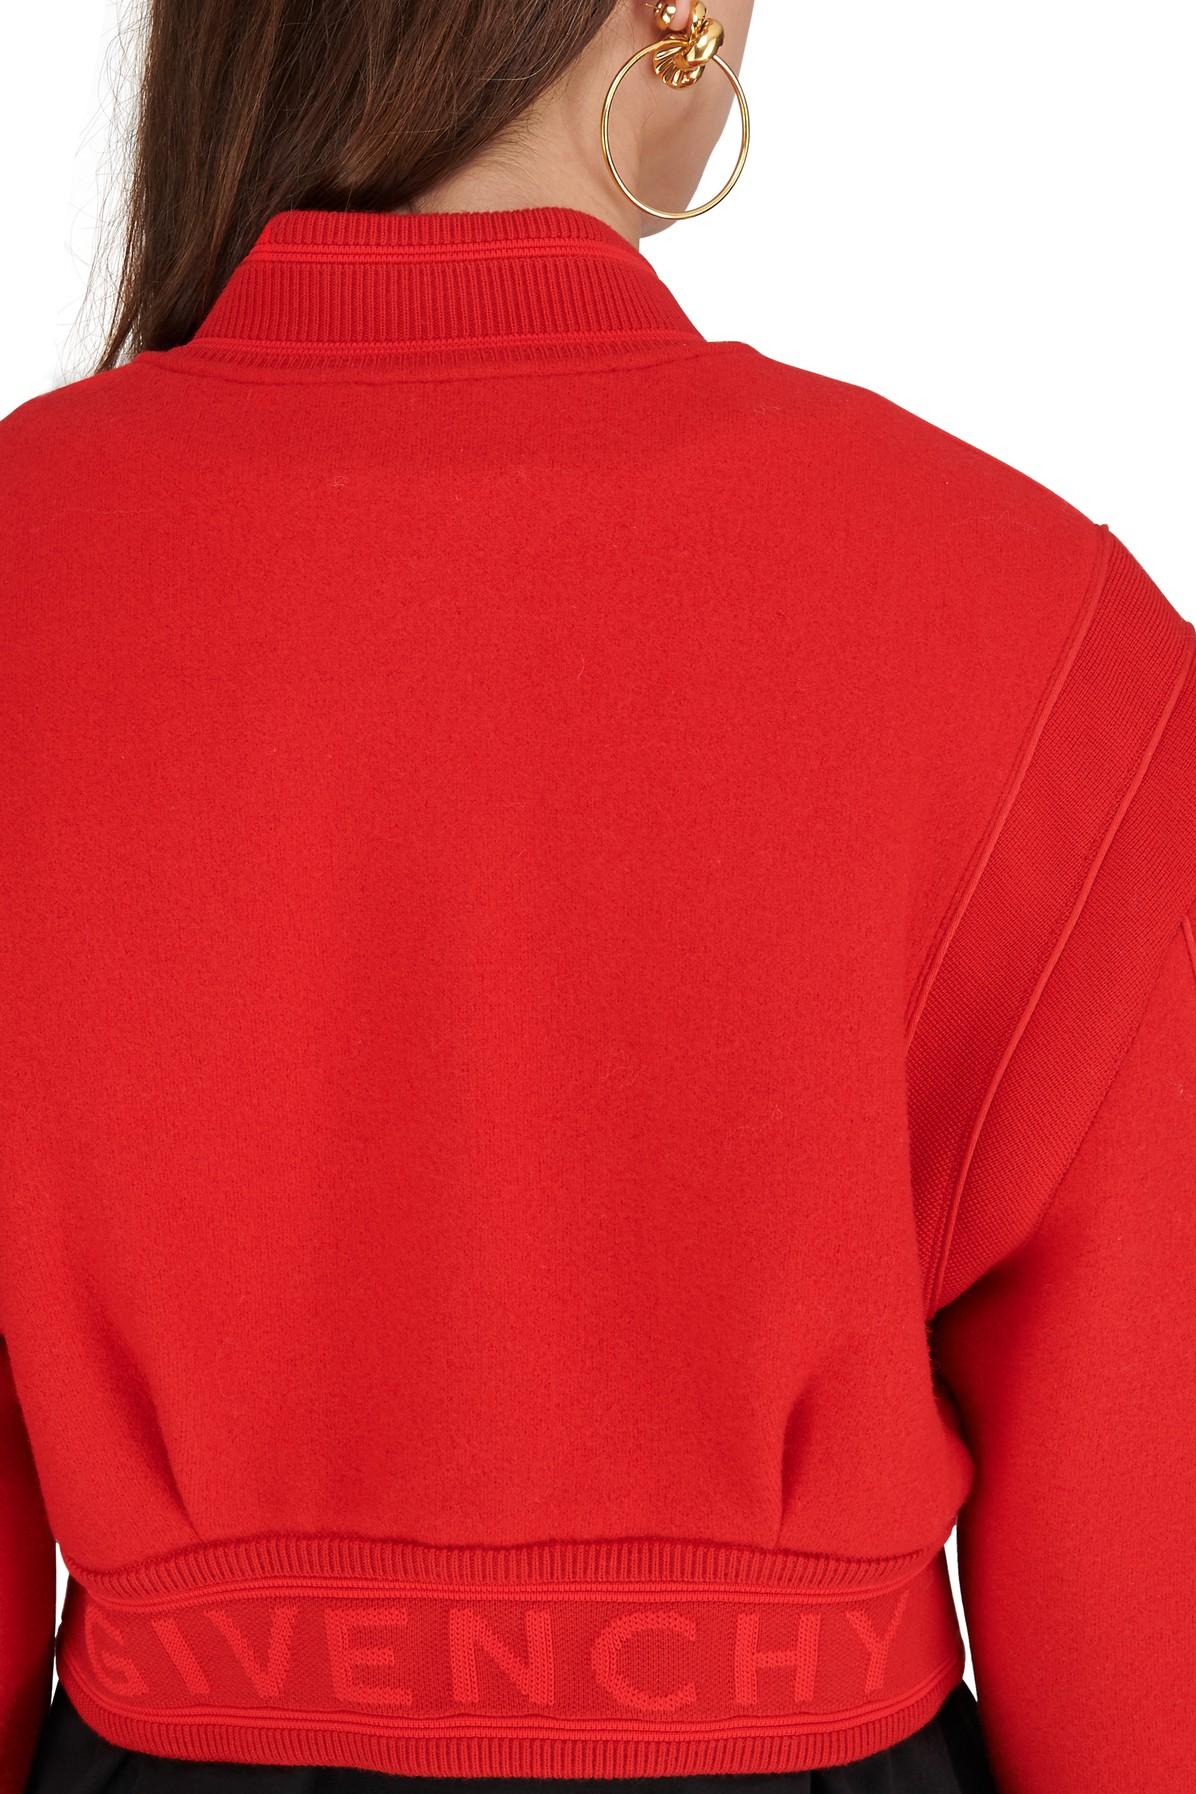 Givenchy Varsity Jacket in Red | Lyst